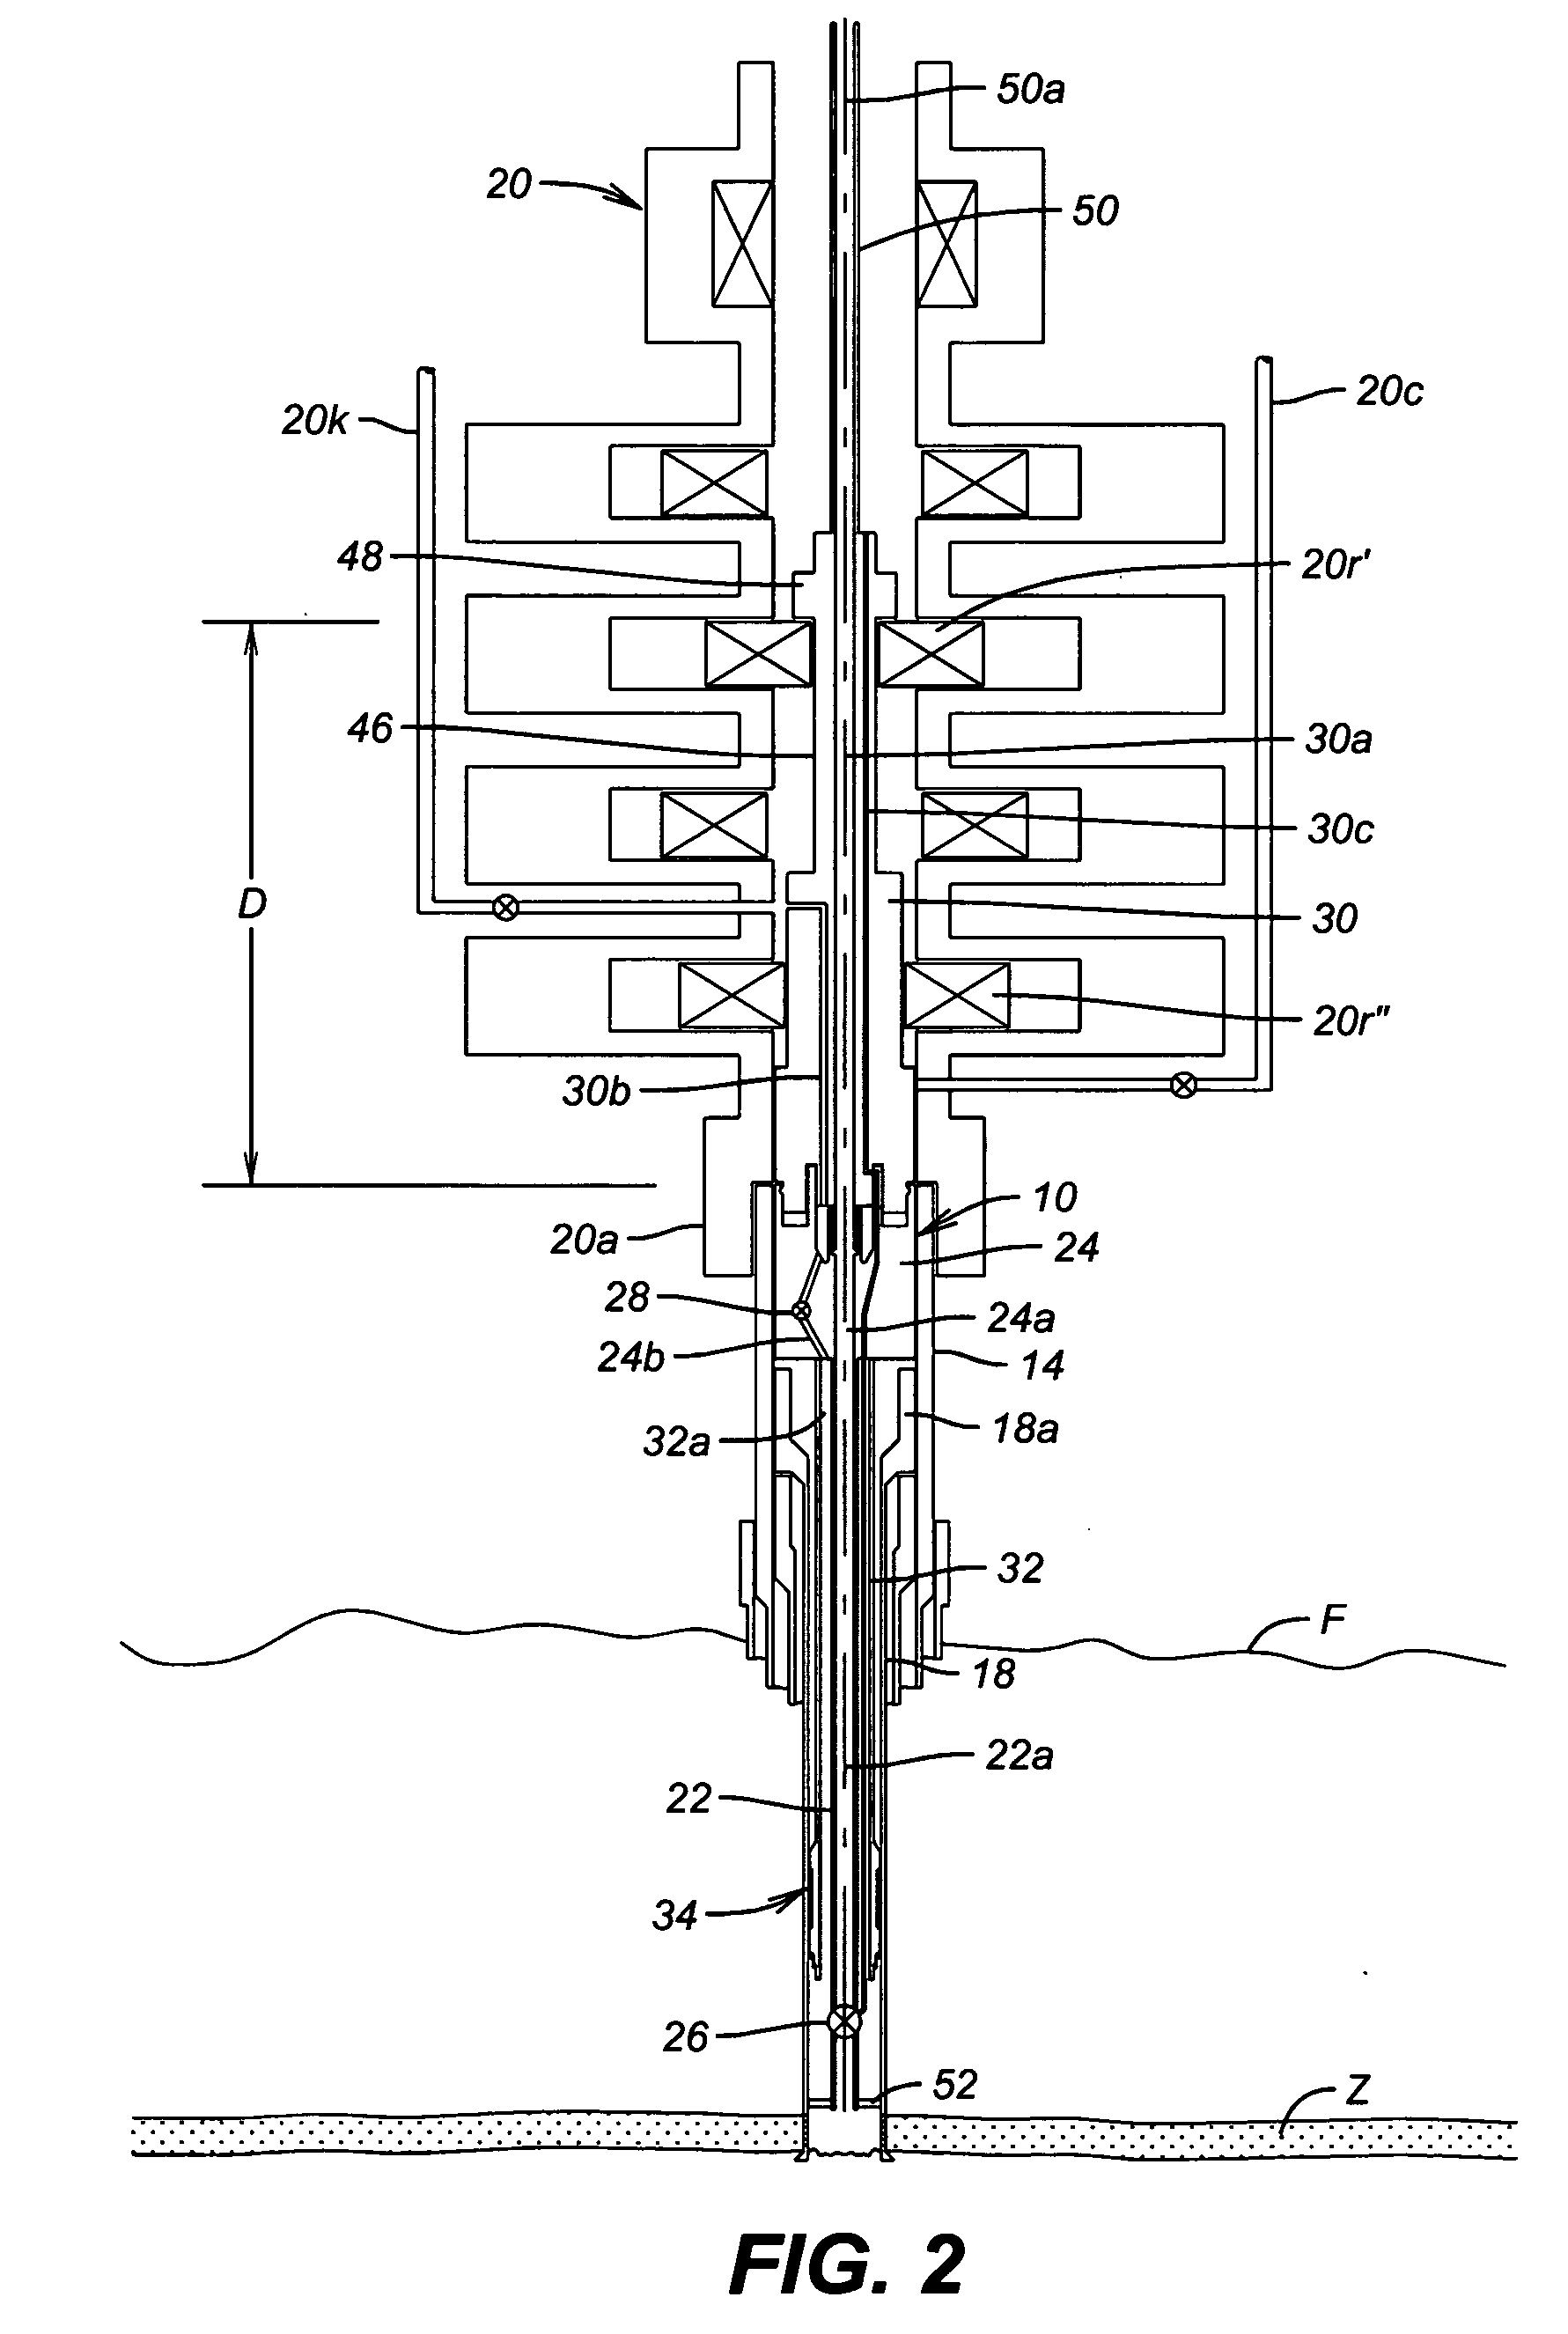 Universal tubing hanger suspension assembly and well completion system and method of using same